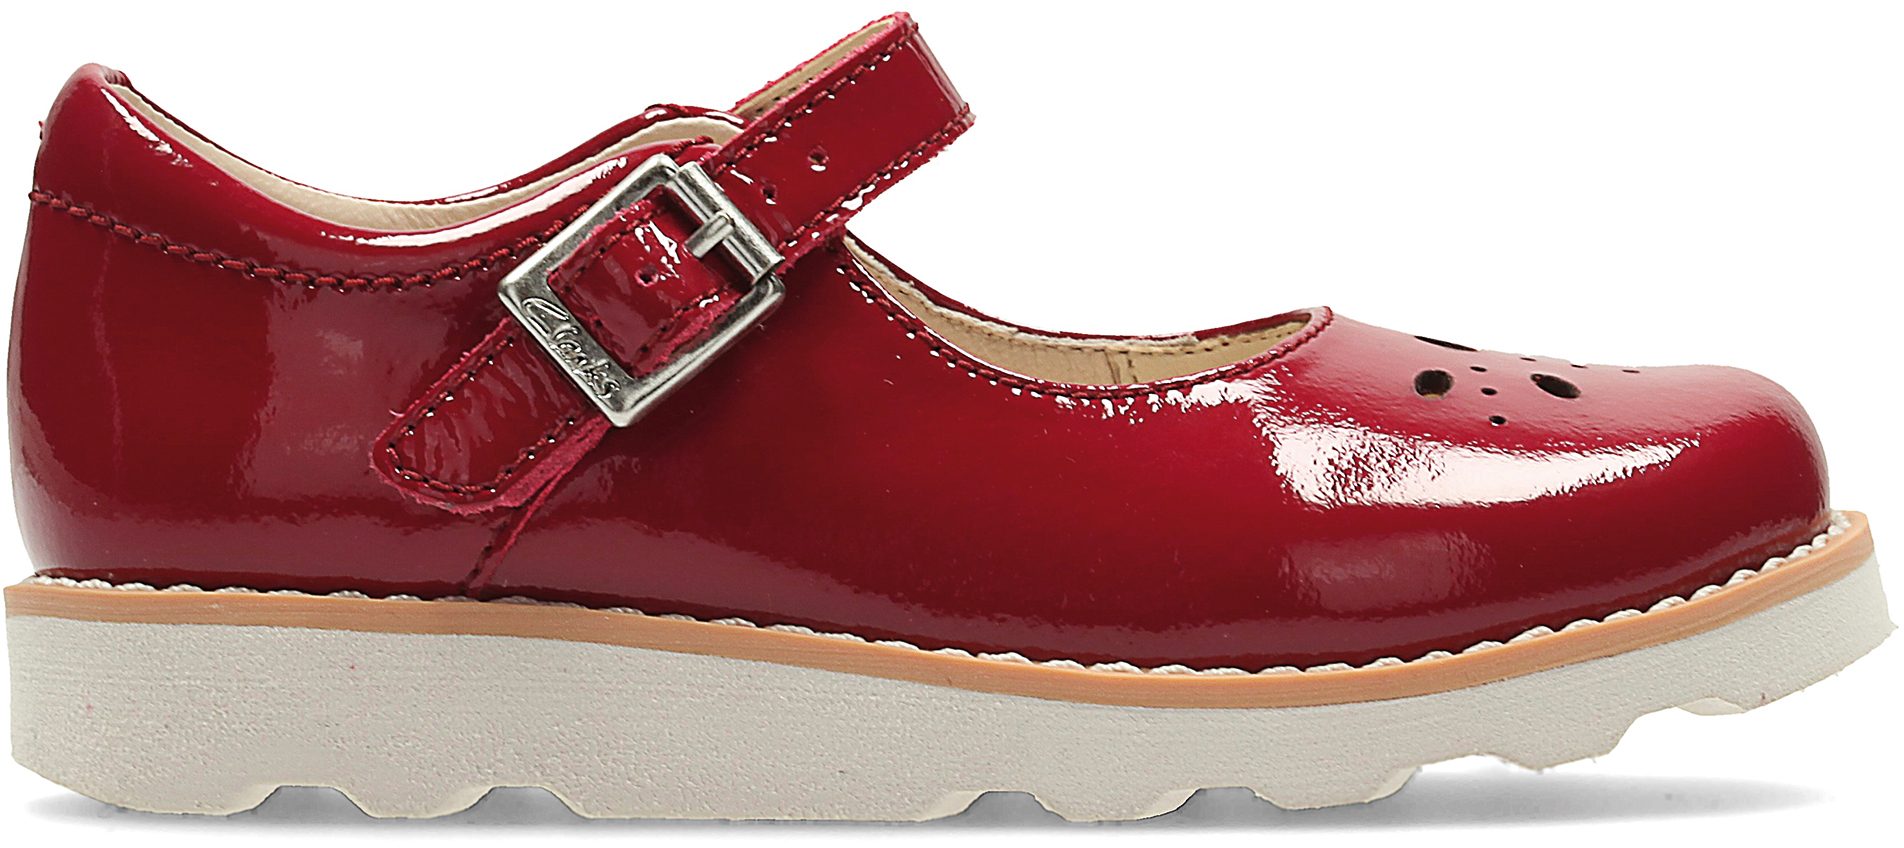 Clarks Crown Posy Infant Red Patent 26123639 - Girls Shoes - Humphries ...